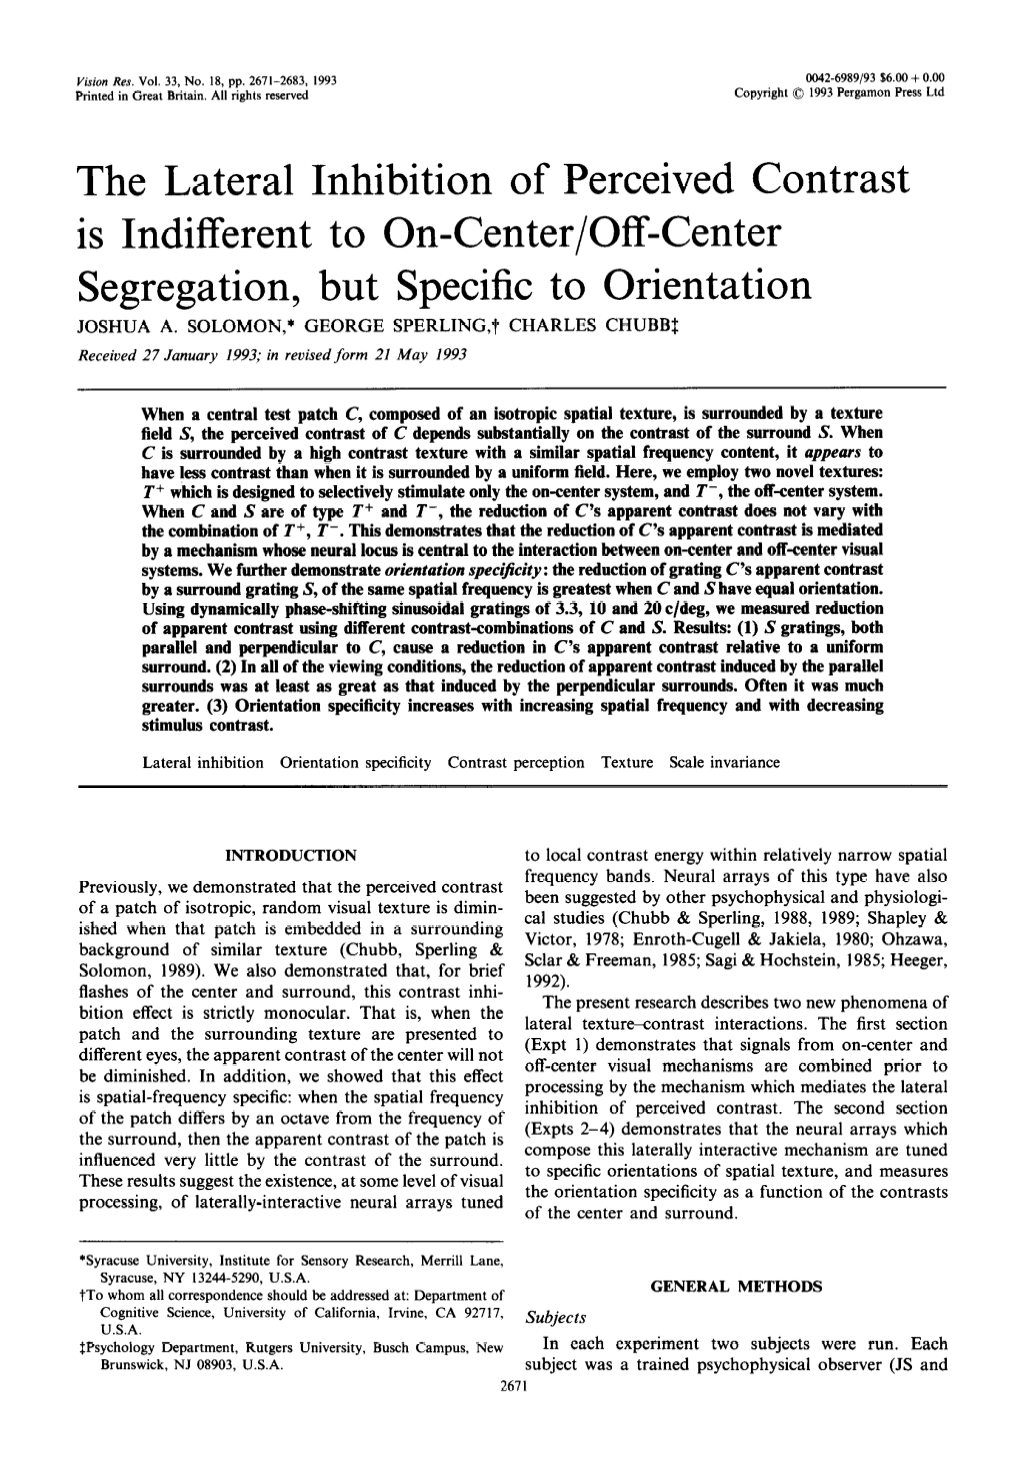 The Lateral Inhibition of Perceived Contrast Is Indifferent to On-Center/Off-Center Segregation, but Specific to Orientation JOSHUA A